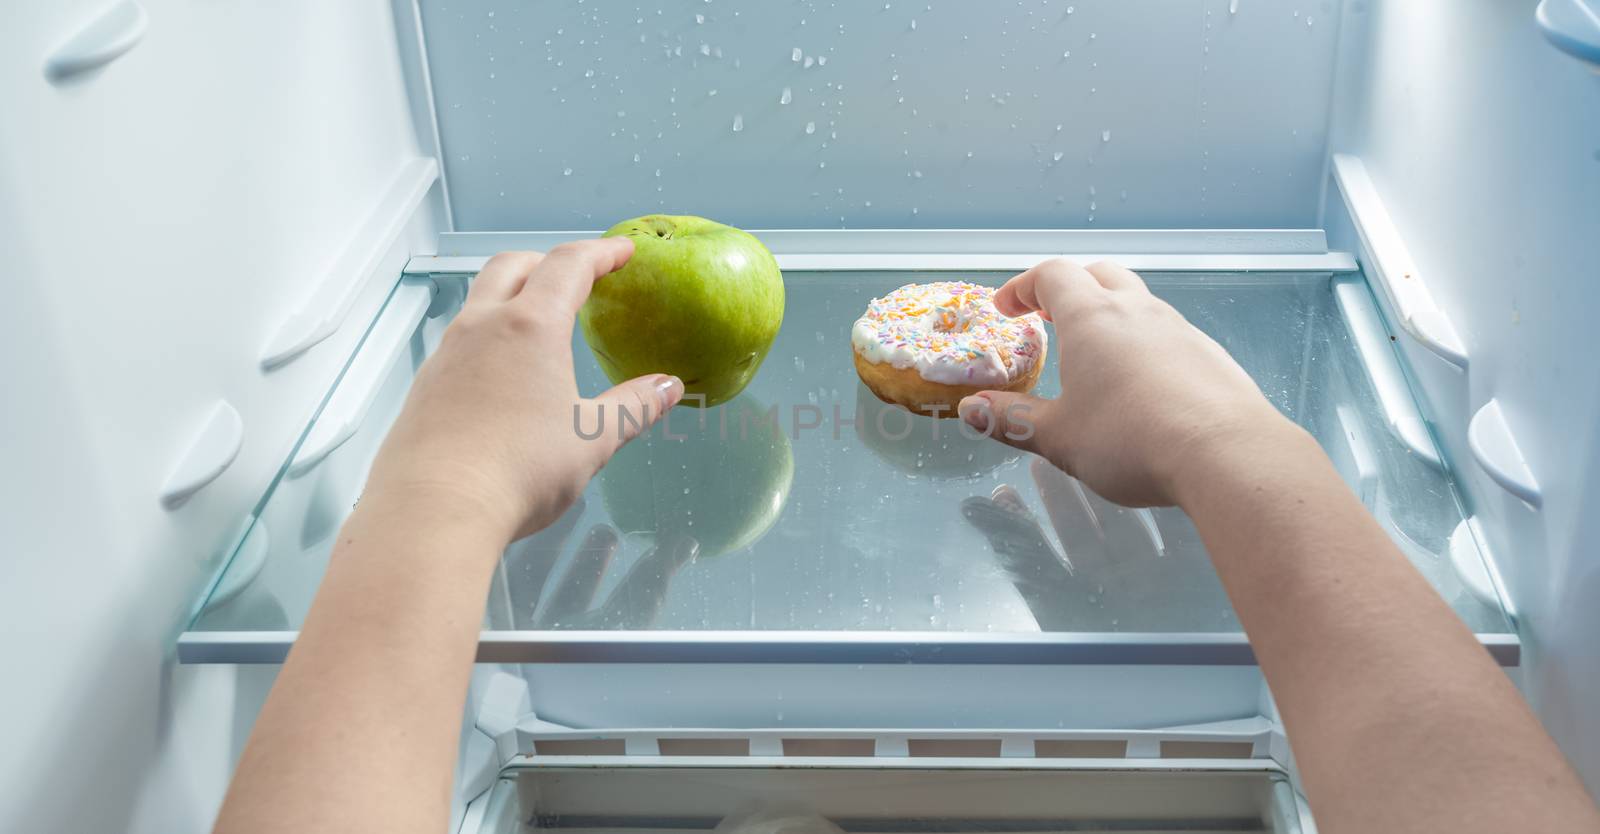 hands taking green apple and donut from fridge by Kryzhov